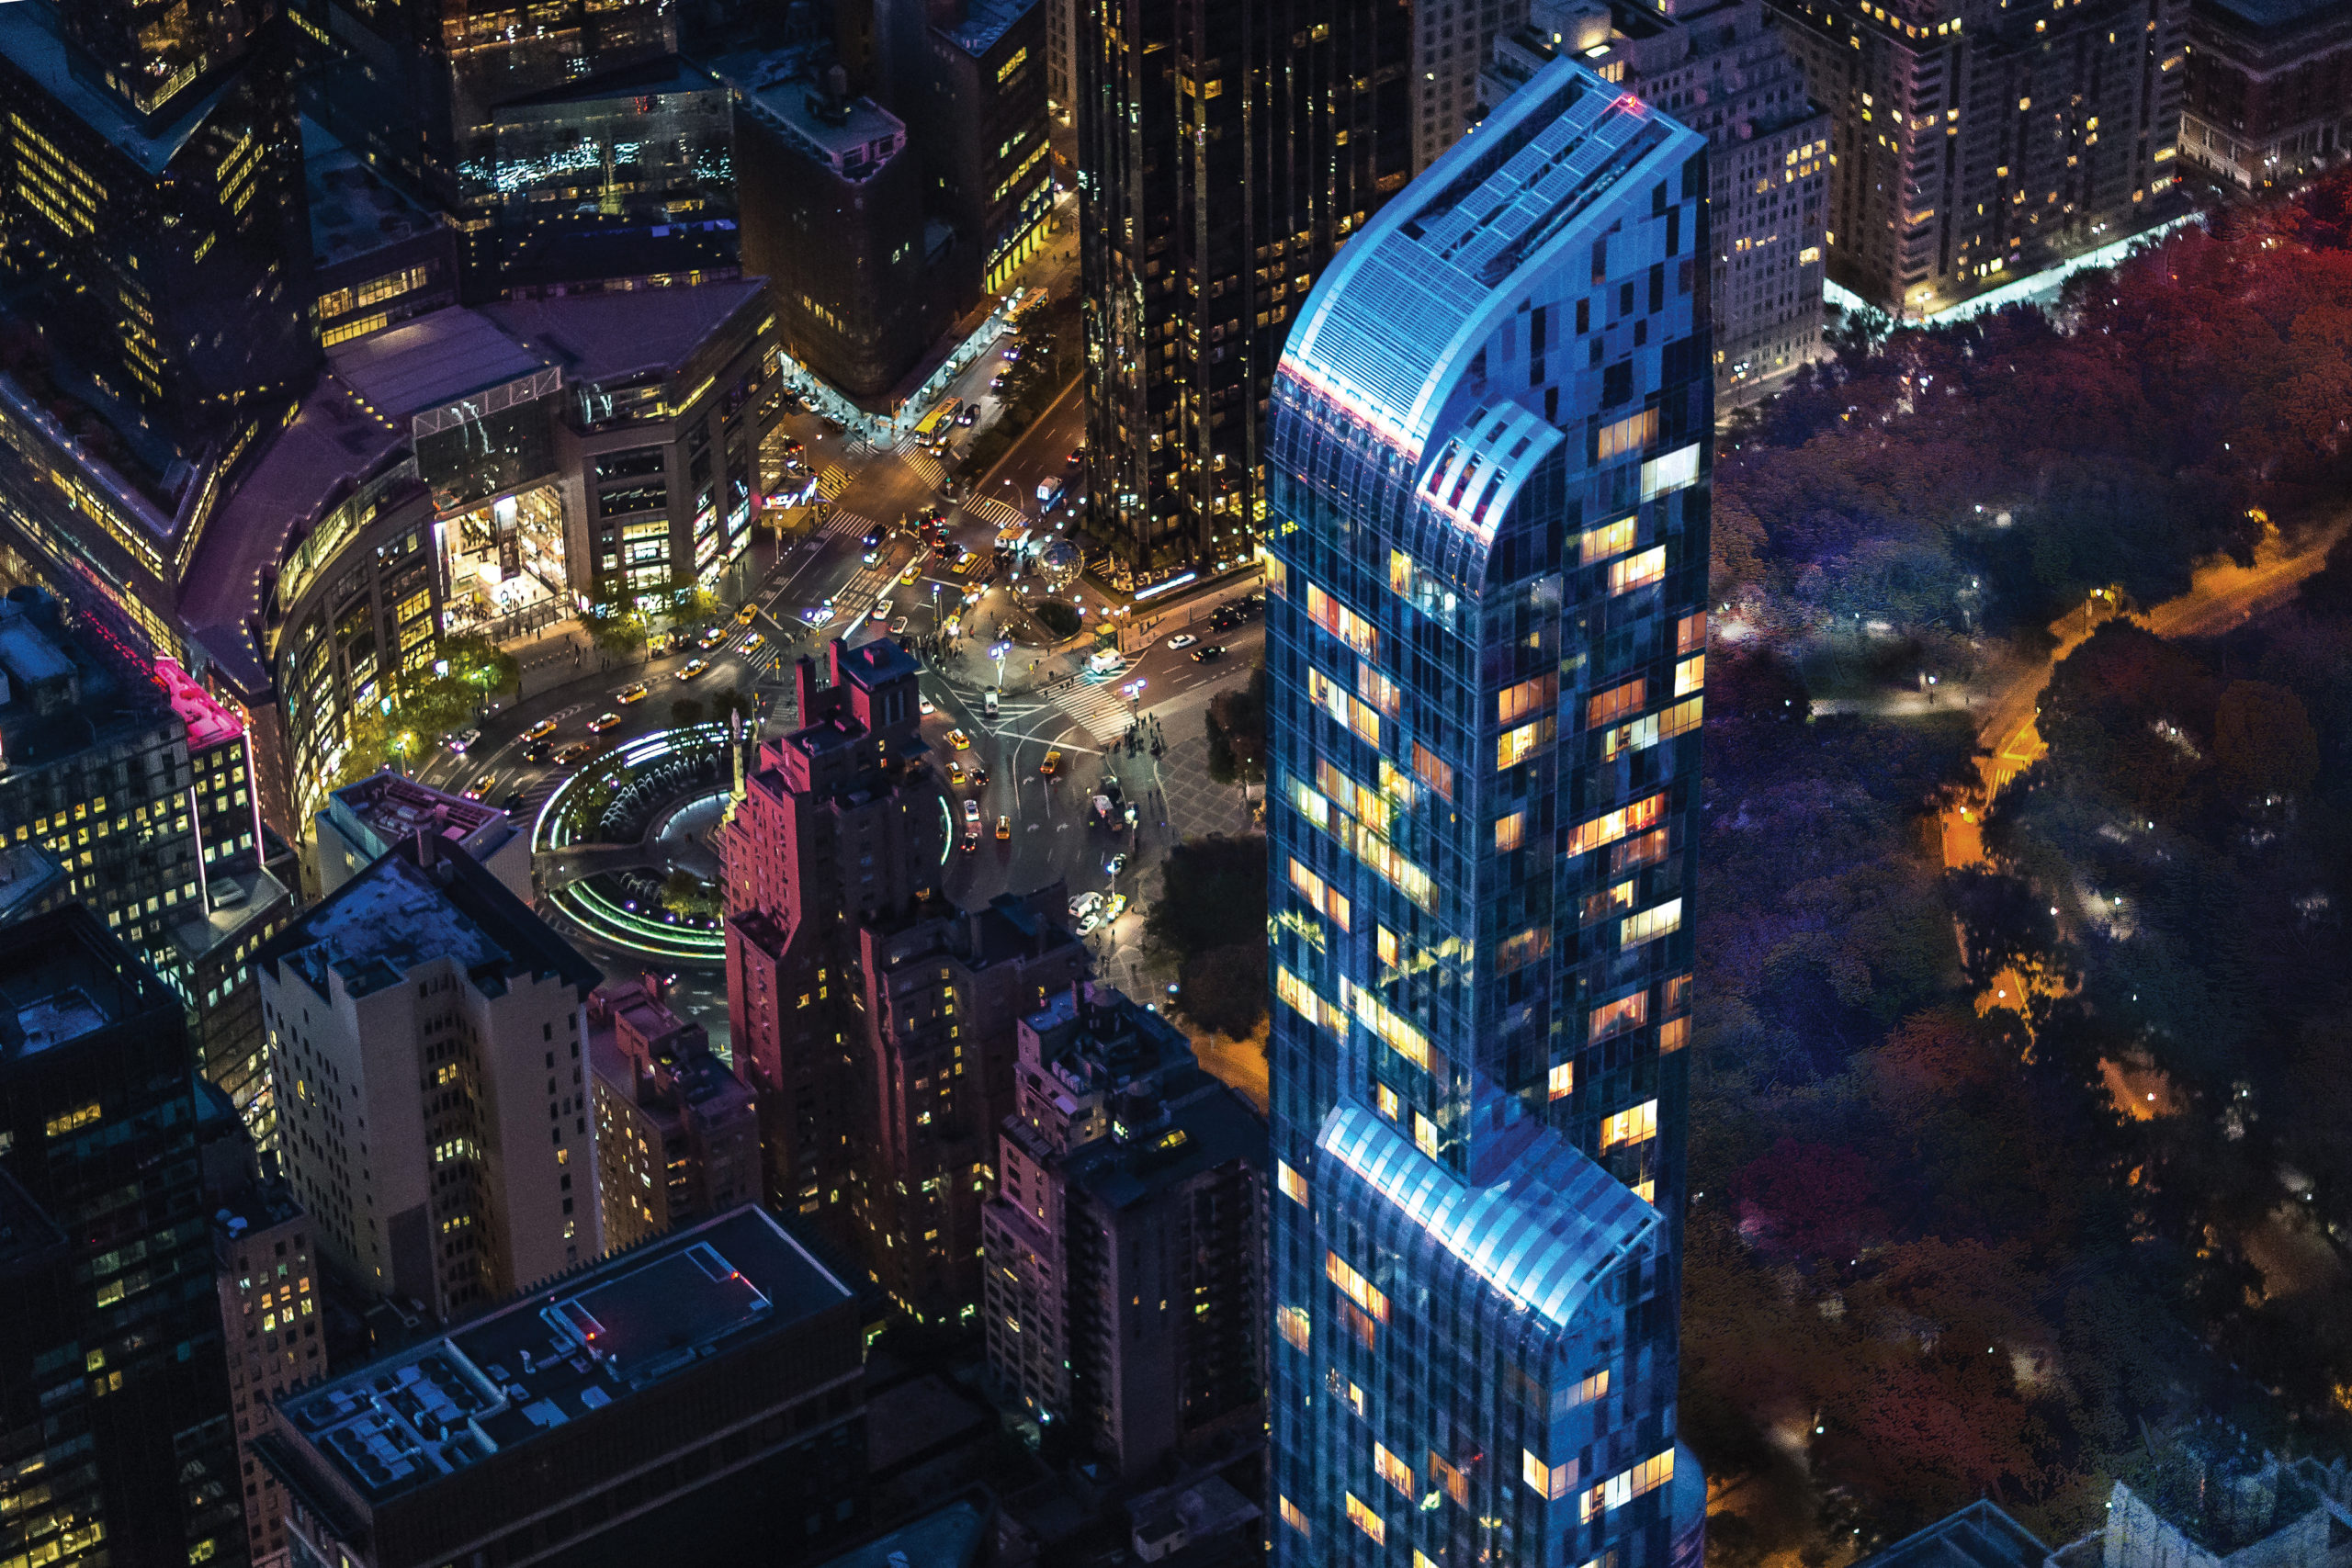 Night-time aerial view of One 57 luxury condominiums in New York City with lit up downtown background.